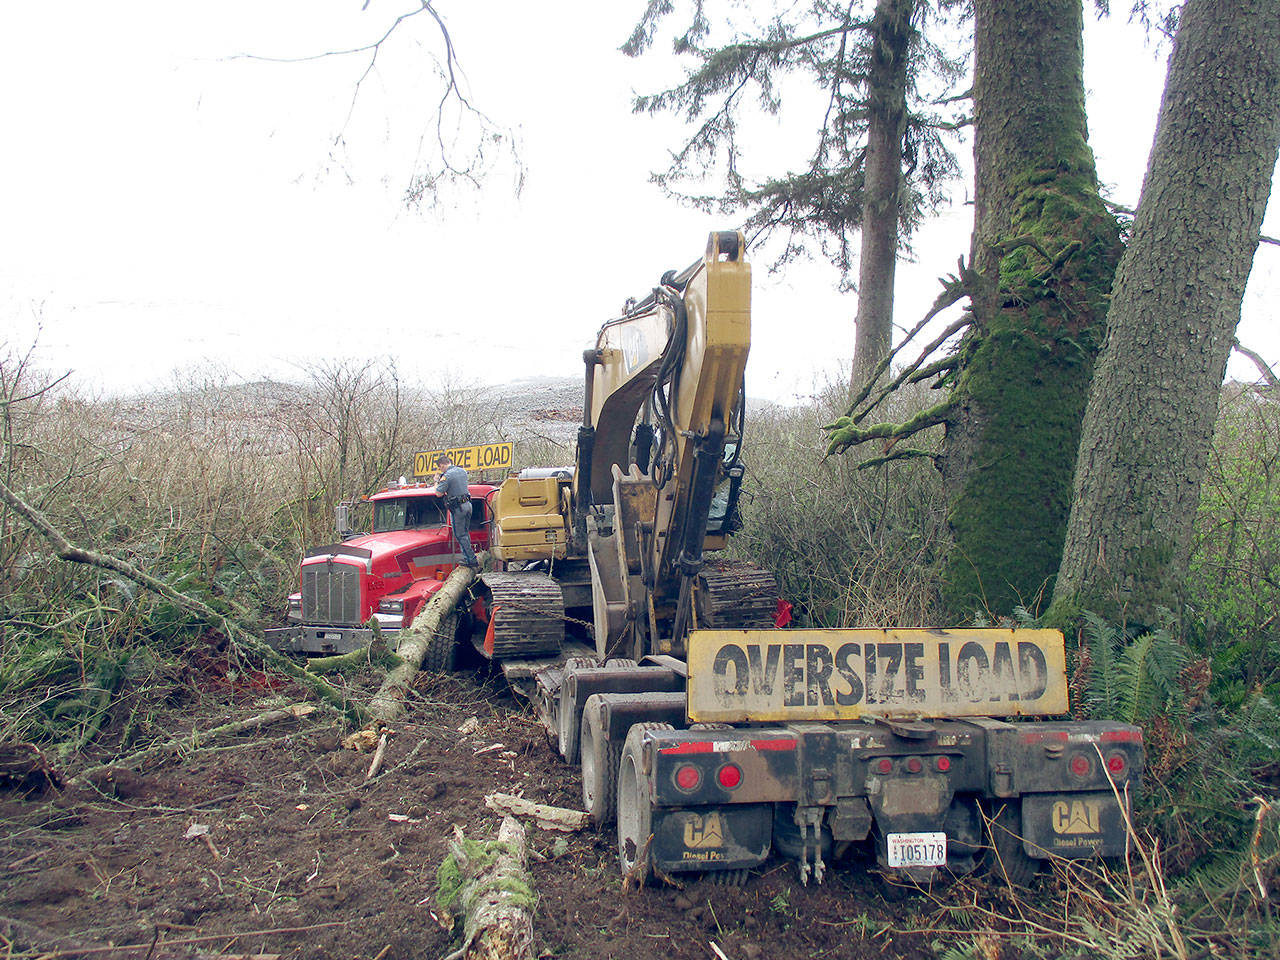 A truck hauling an excavator missed a turn at milepost 39 on state Highway 112 at 1 p.m. Monday, fell 100 feet down an embankment and jack-knifed on the beach below, according to State Patrol. (Kaleb Miller/Washington State Patrol)